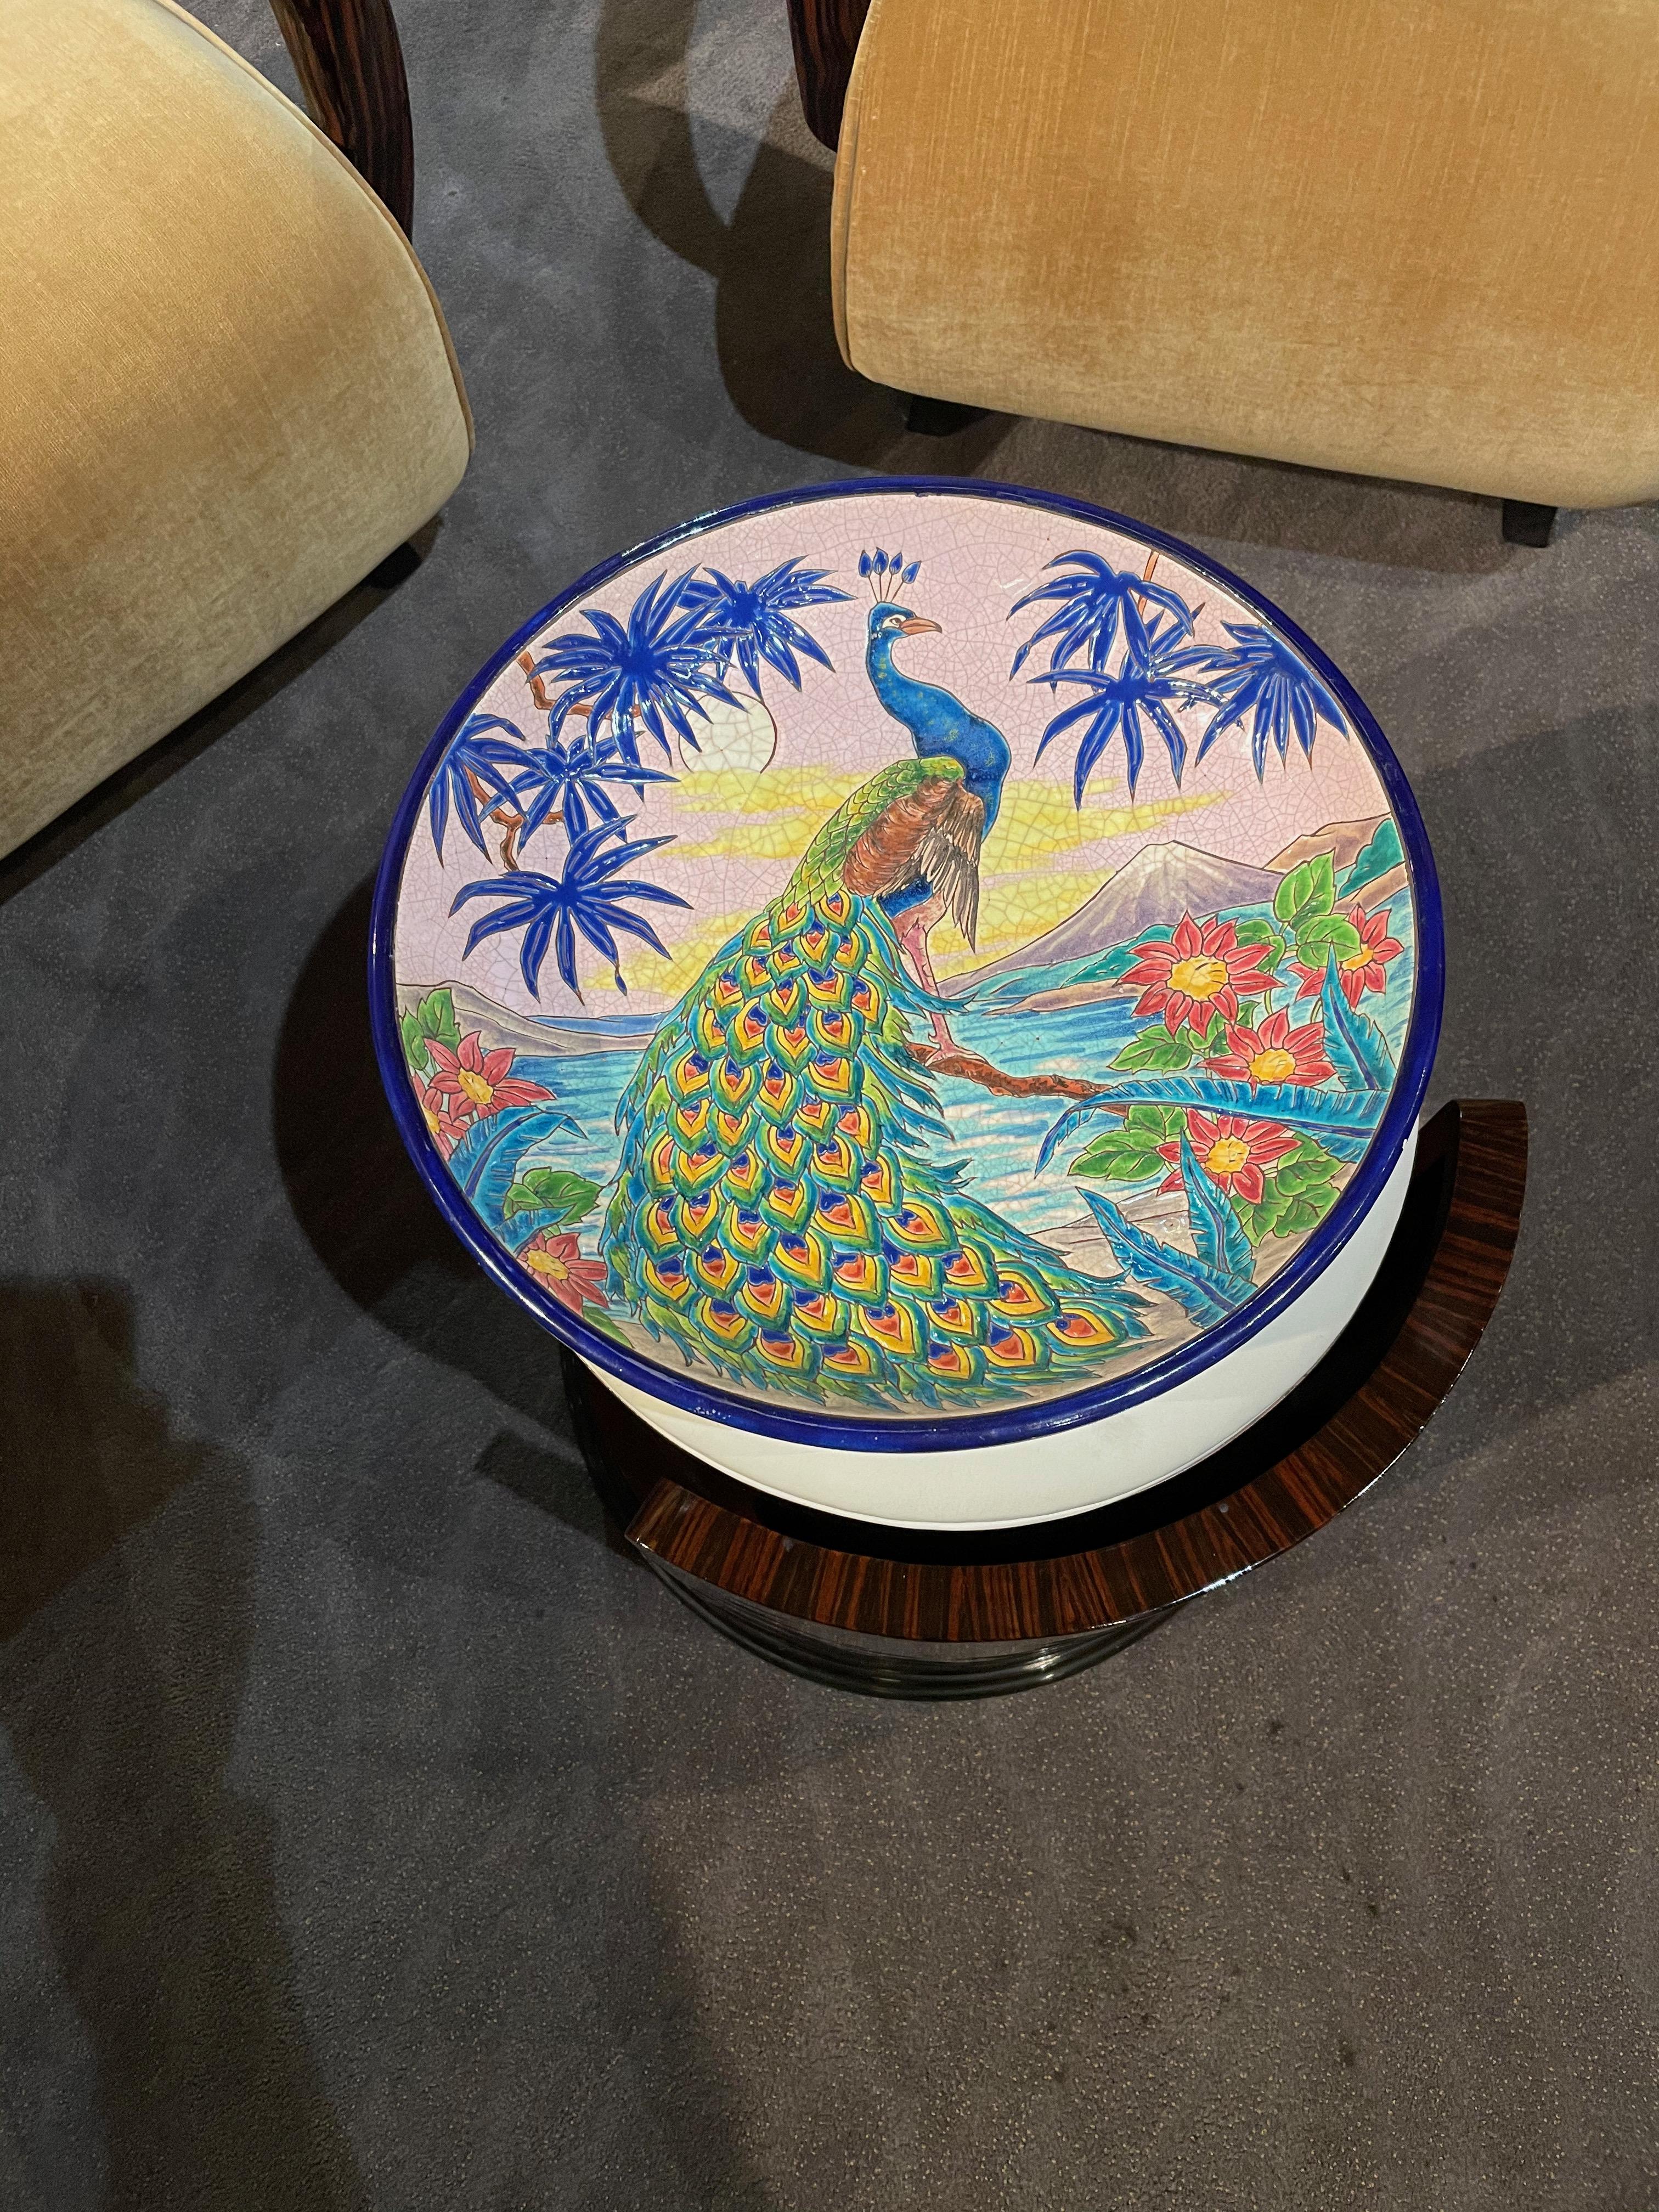 A rare large decorative French deep wall charger by R. Rizzi for Faiences de Longwy de Luneville. Decorated in a crackle glaze of vibrant colors and gilt and enameled with a peacock surrounded by colorful foliage. Craquelle white ground and metallic